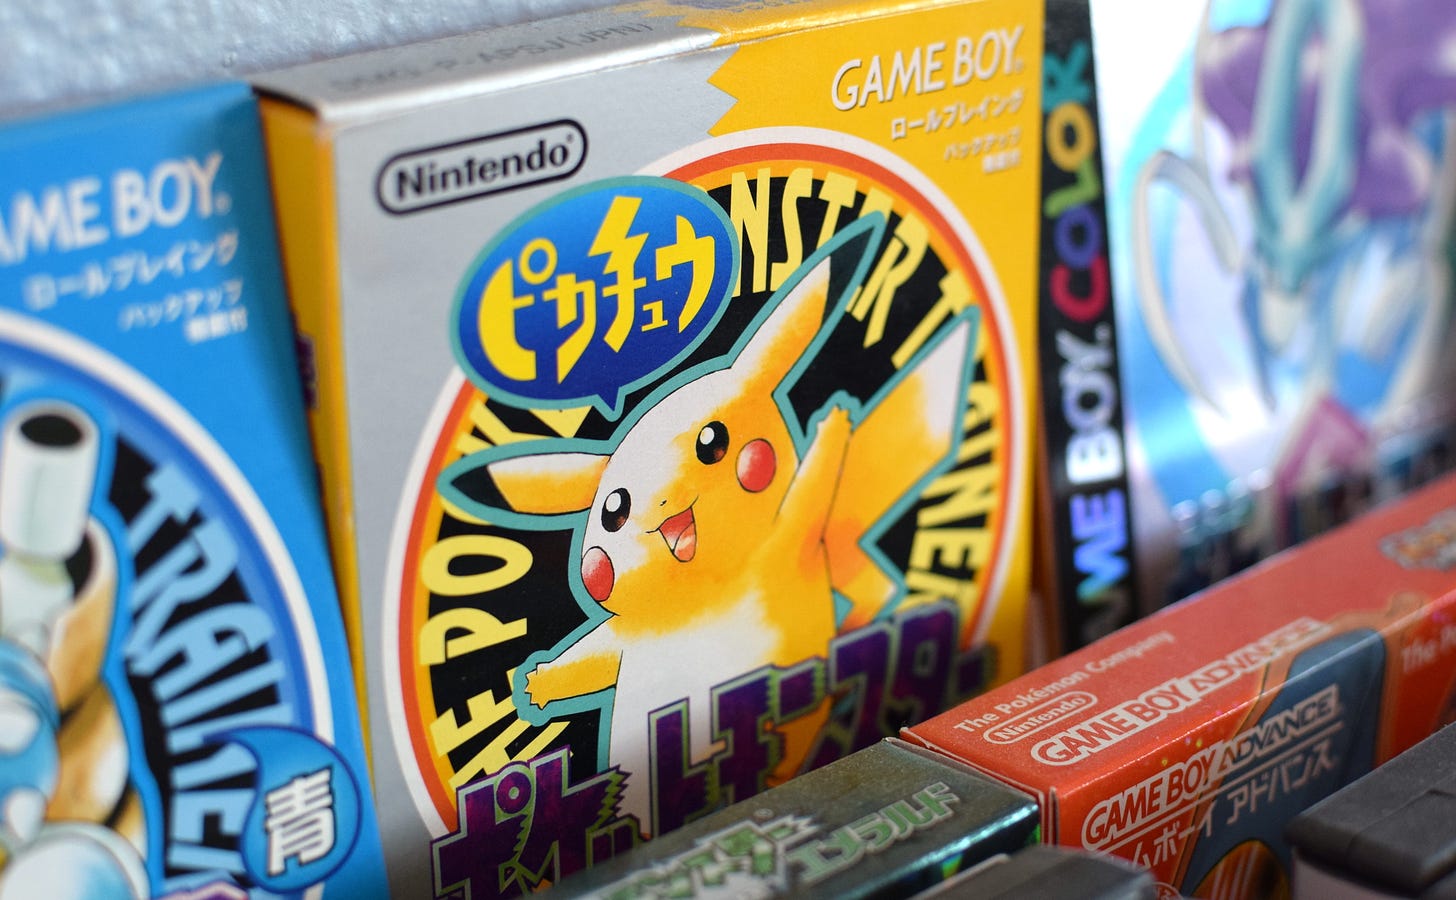 A photograph showing Chris’s collection of Japanese Pokémon games, which include Pokémon Blue, Yellow, Crystal, Emerald, and FireRed